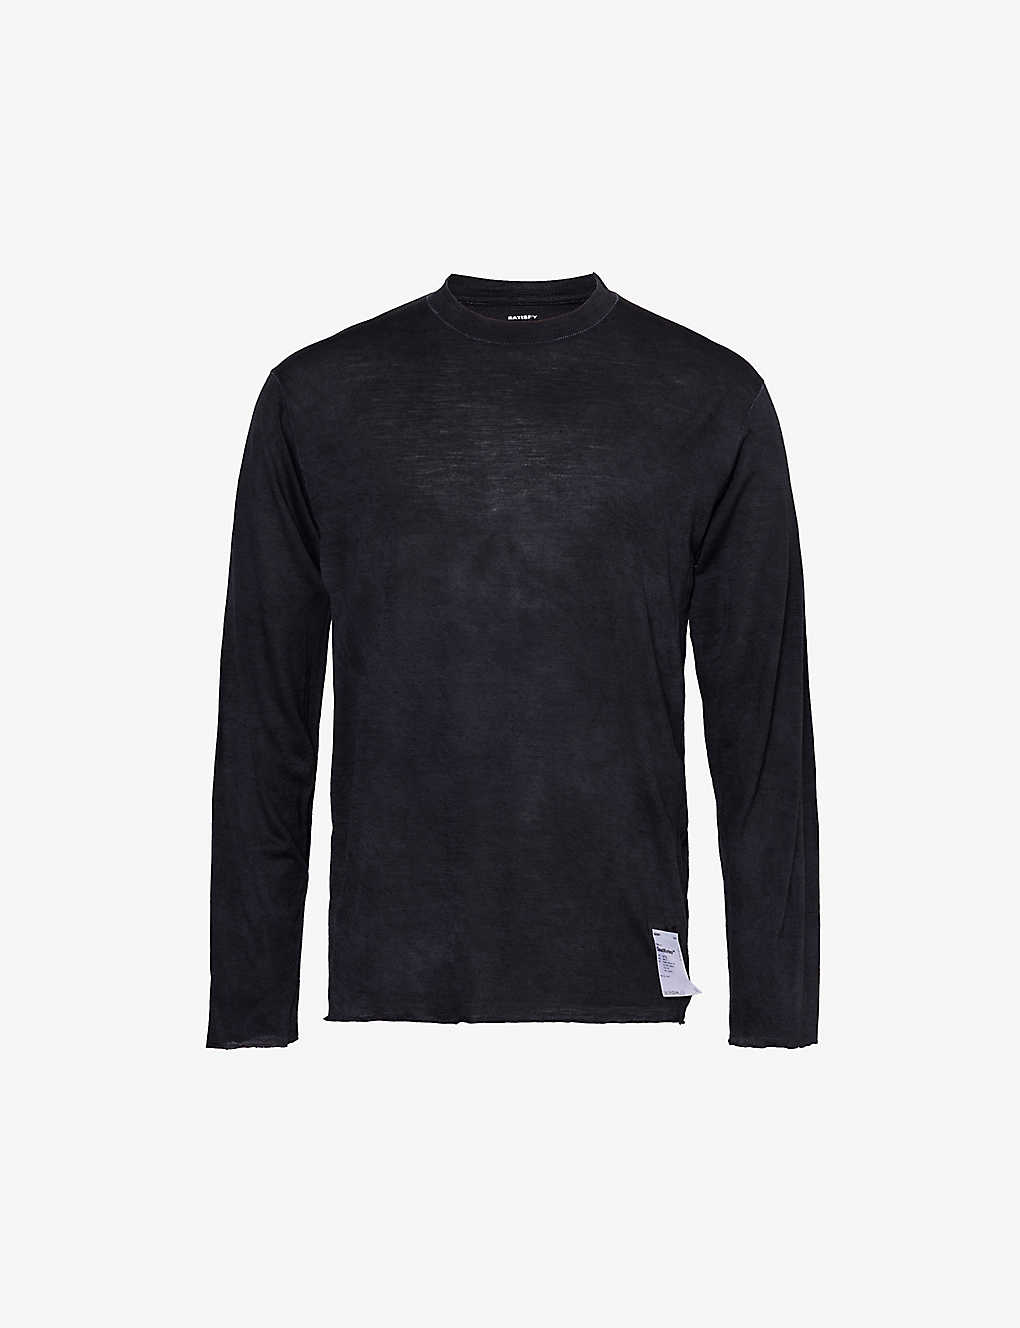 Satisfy Men's Sun Bleached Black Cloudmerino™ Brand-patch Wool-knit Top